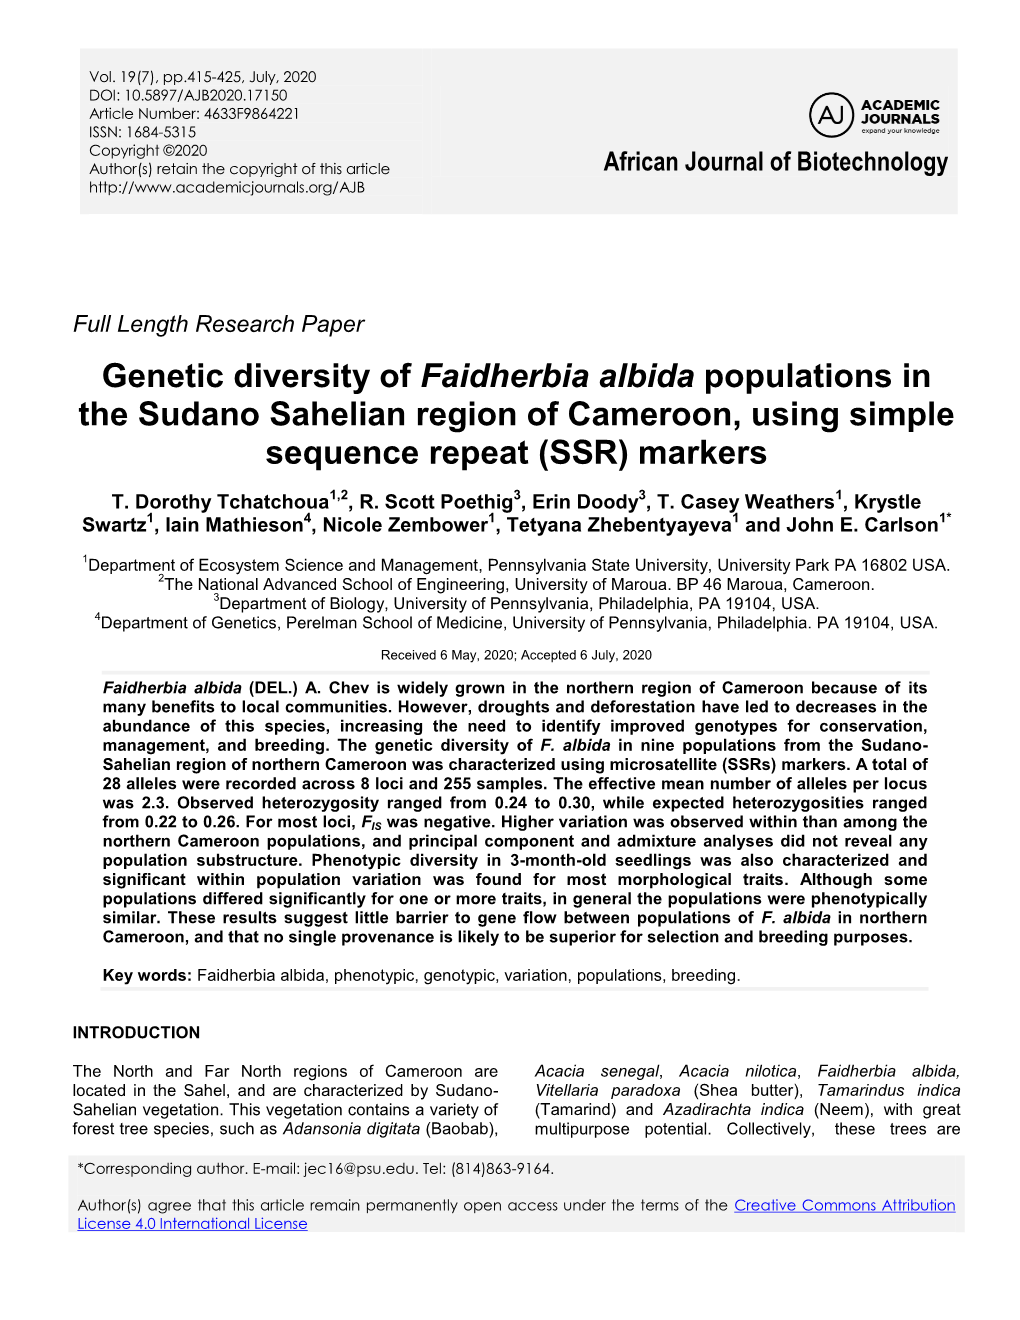 Genetic Diversity of Faidherbia Albida Populations in the Sudano Sahelian Region of Cameroon, Using Simple Sequence Repeat (SSR) Markers